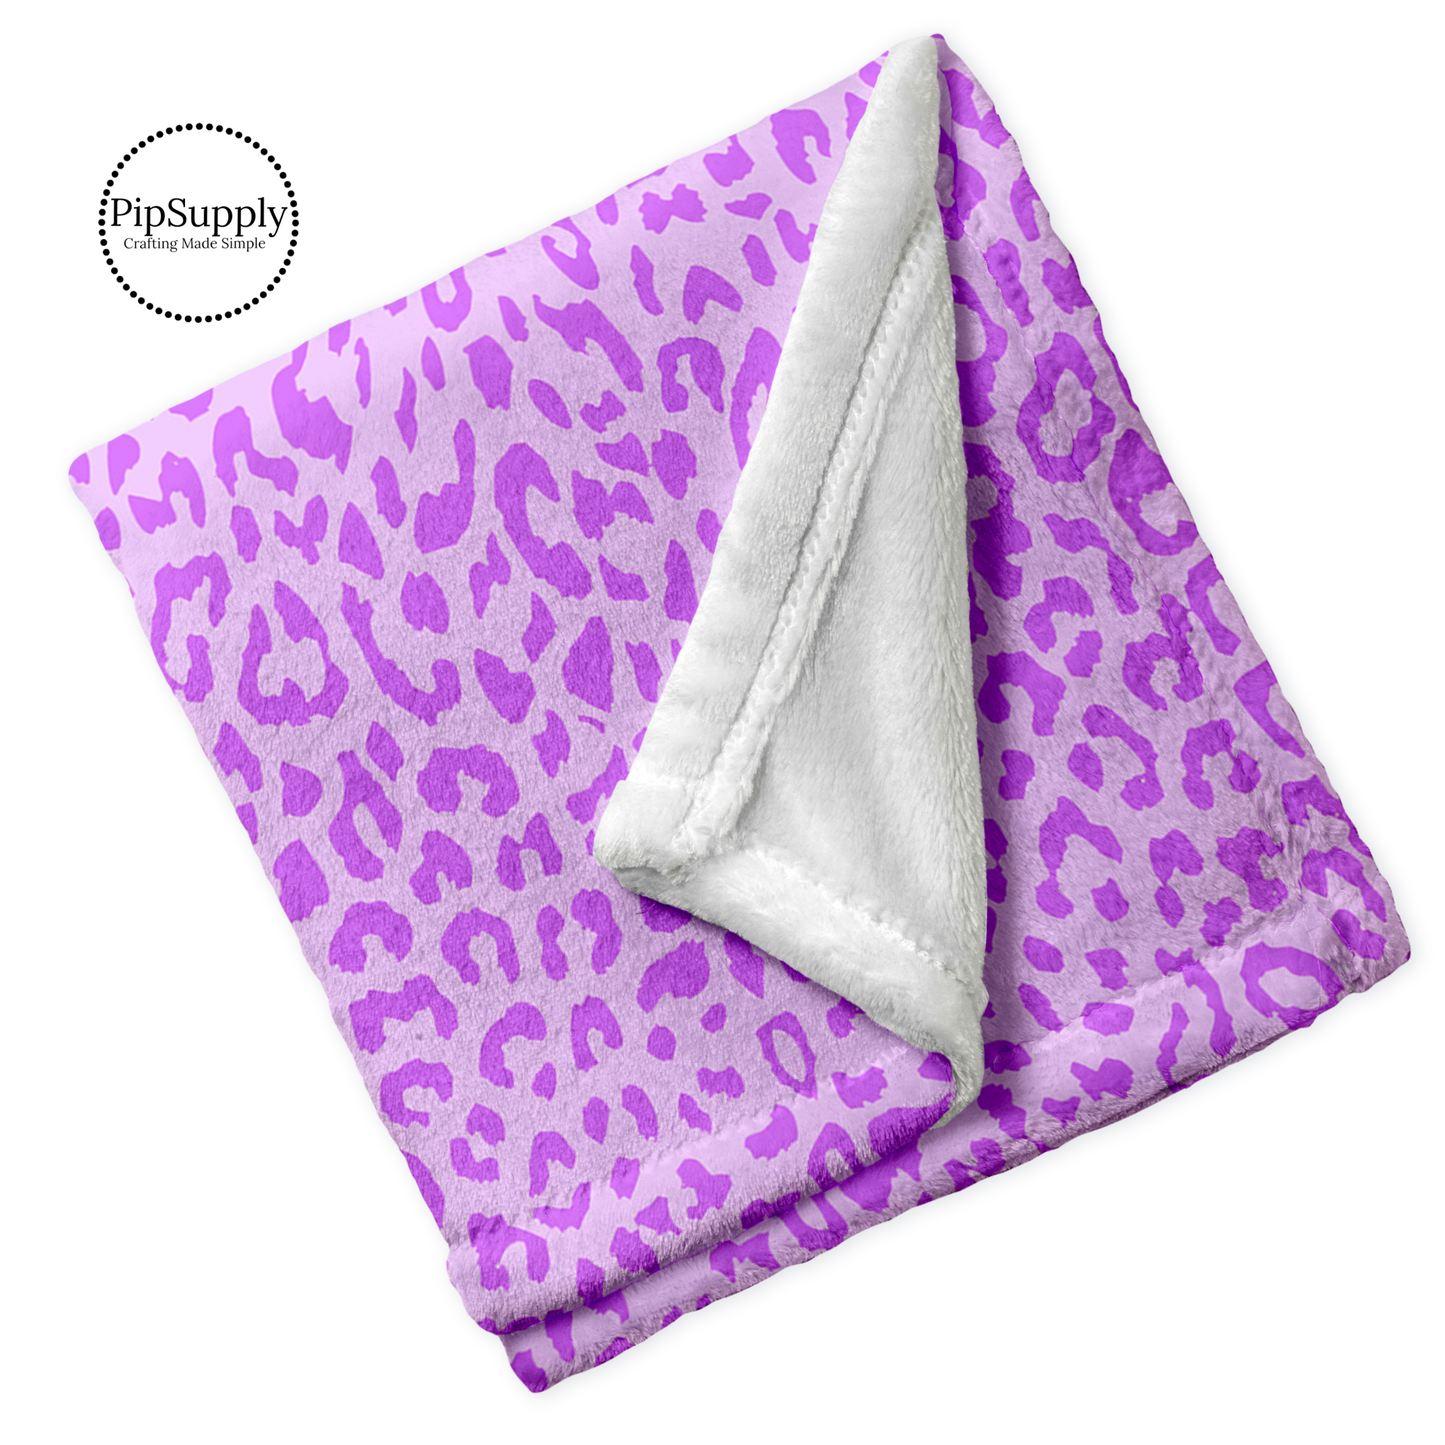 Soft folded minky blanket with lavender and purple leopard animal print.